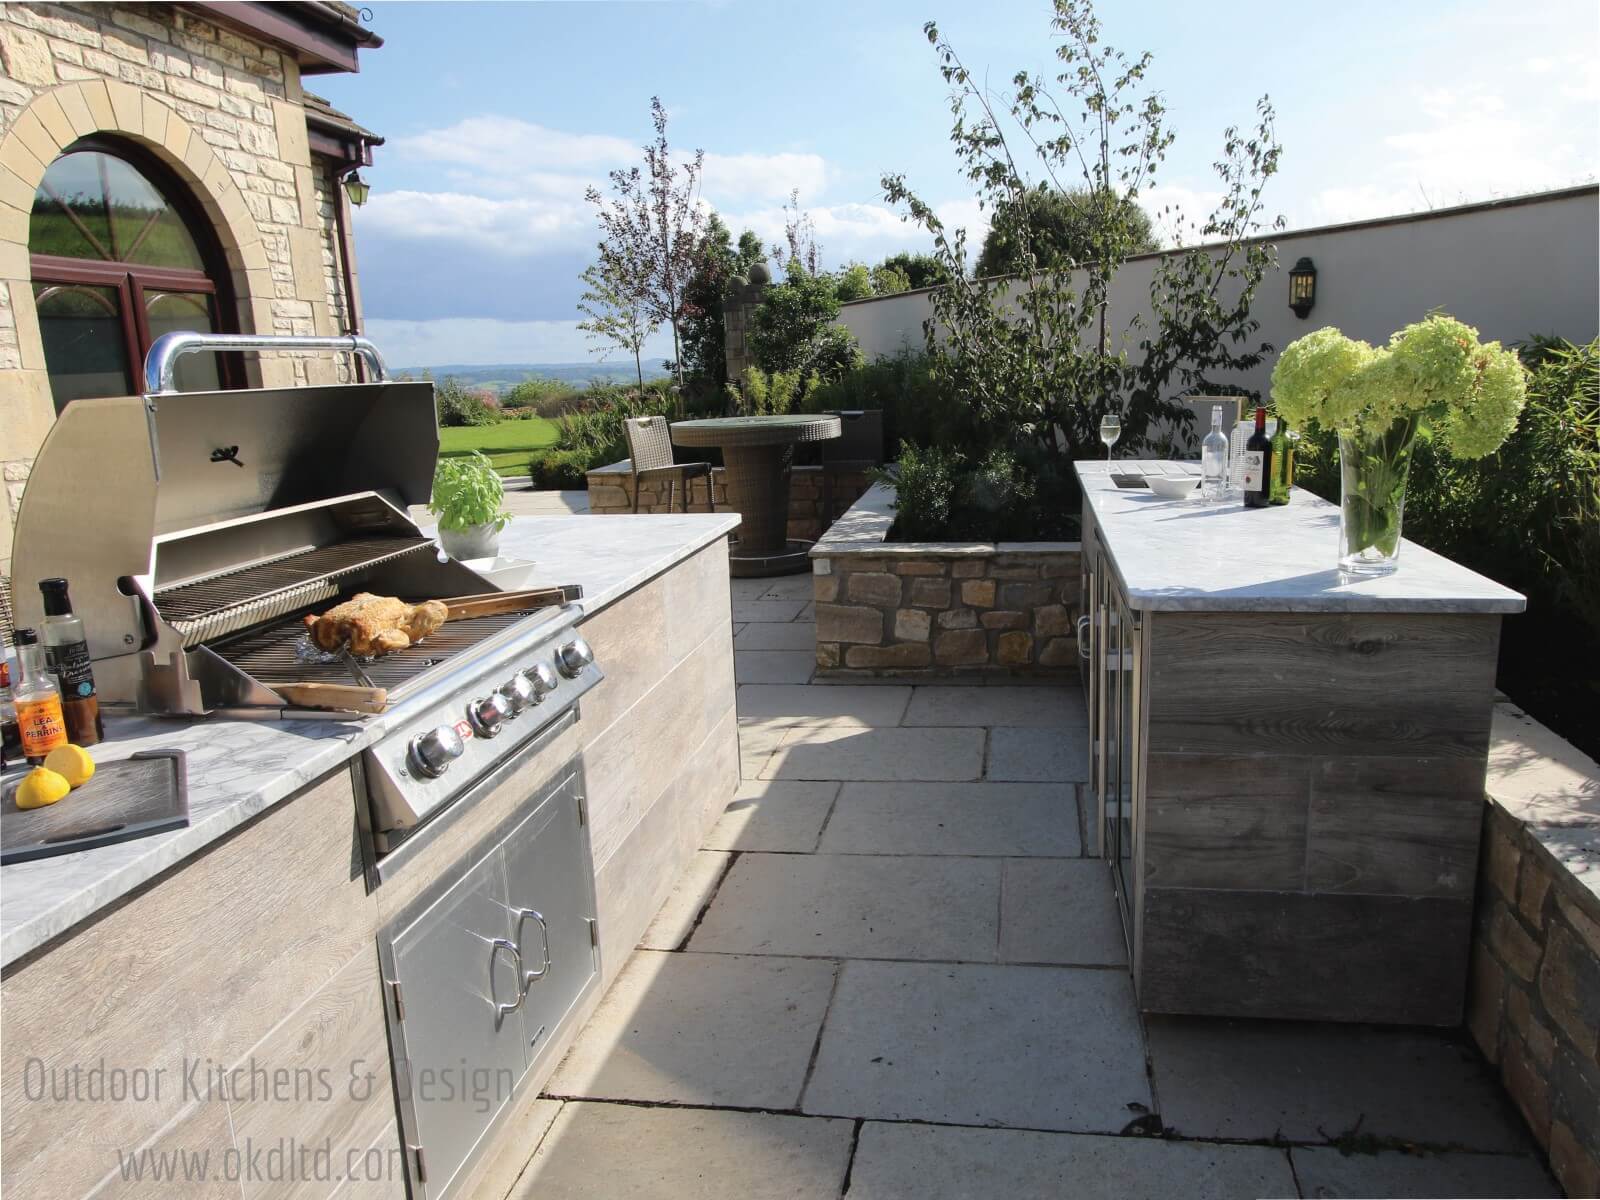 Outdoor kitchen with Bull appliances